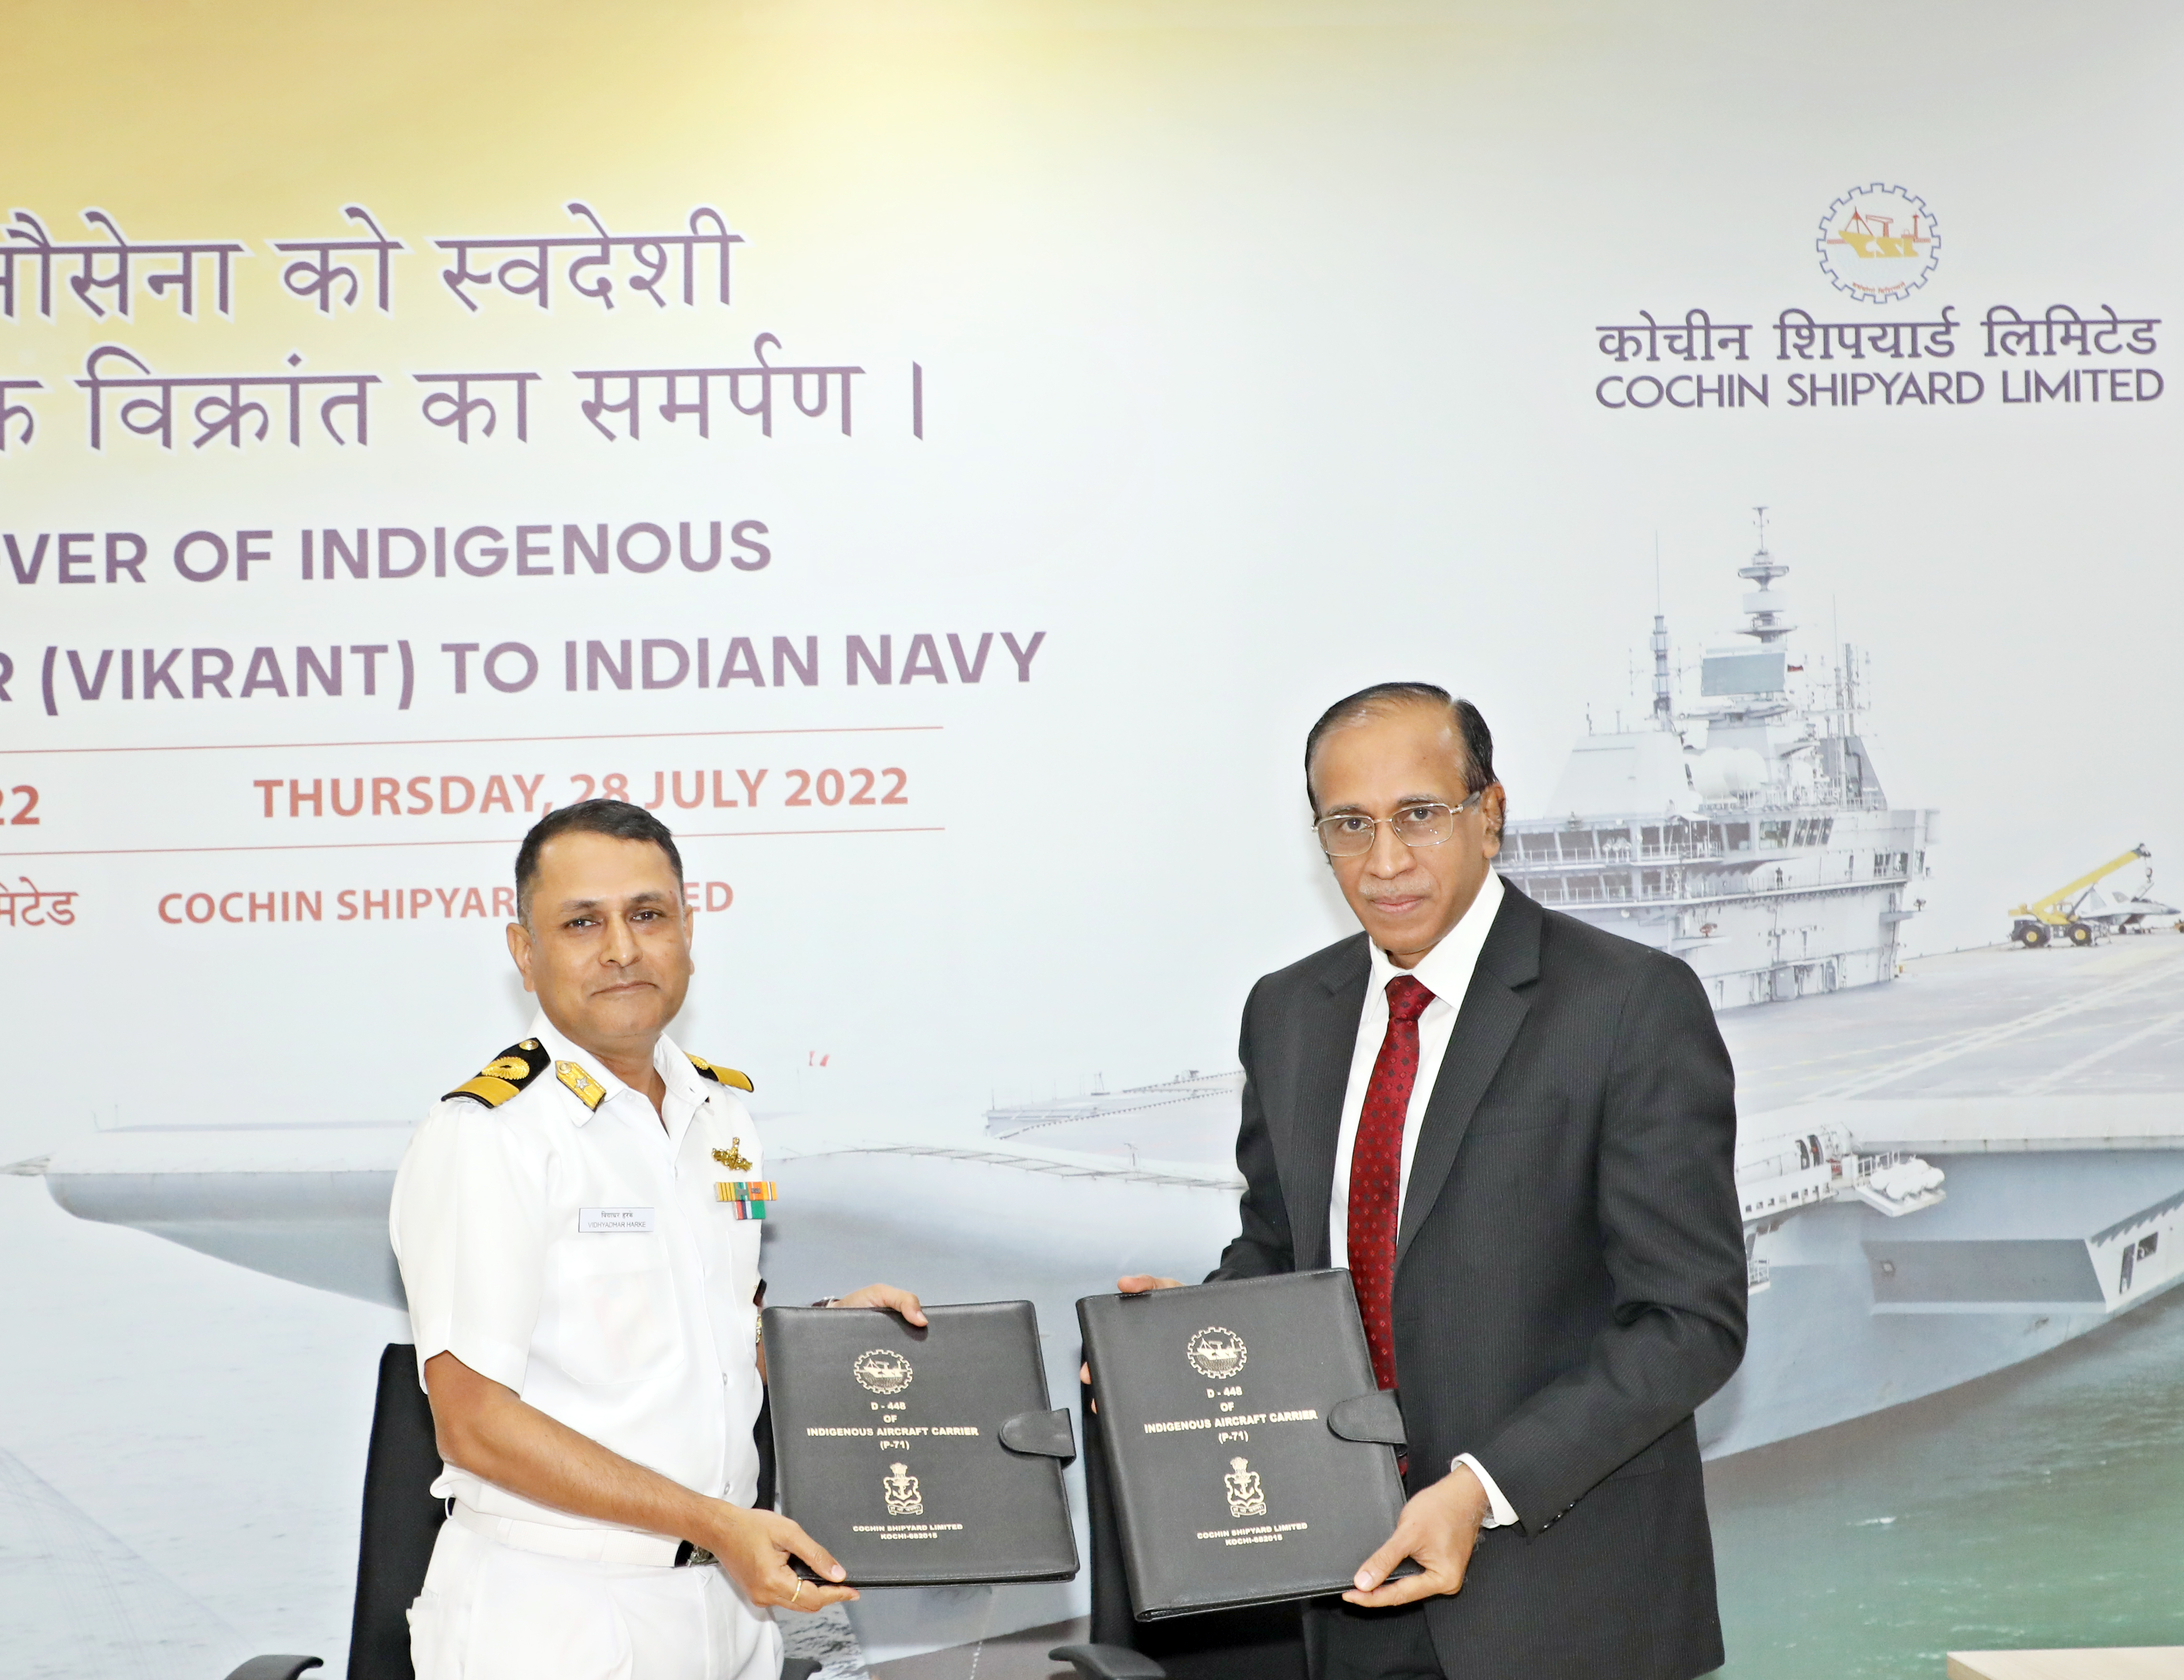  CSL DELIVERS INDIGENOUS AIRCRAFT CARRIER, PROJECT-71 (VIKRANT)  TO THE INDIAN NAVY